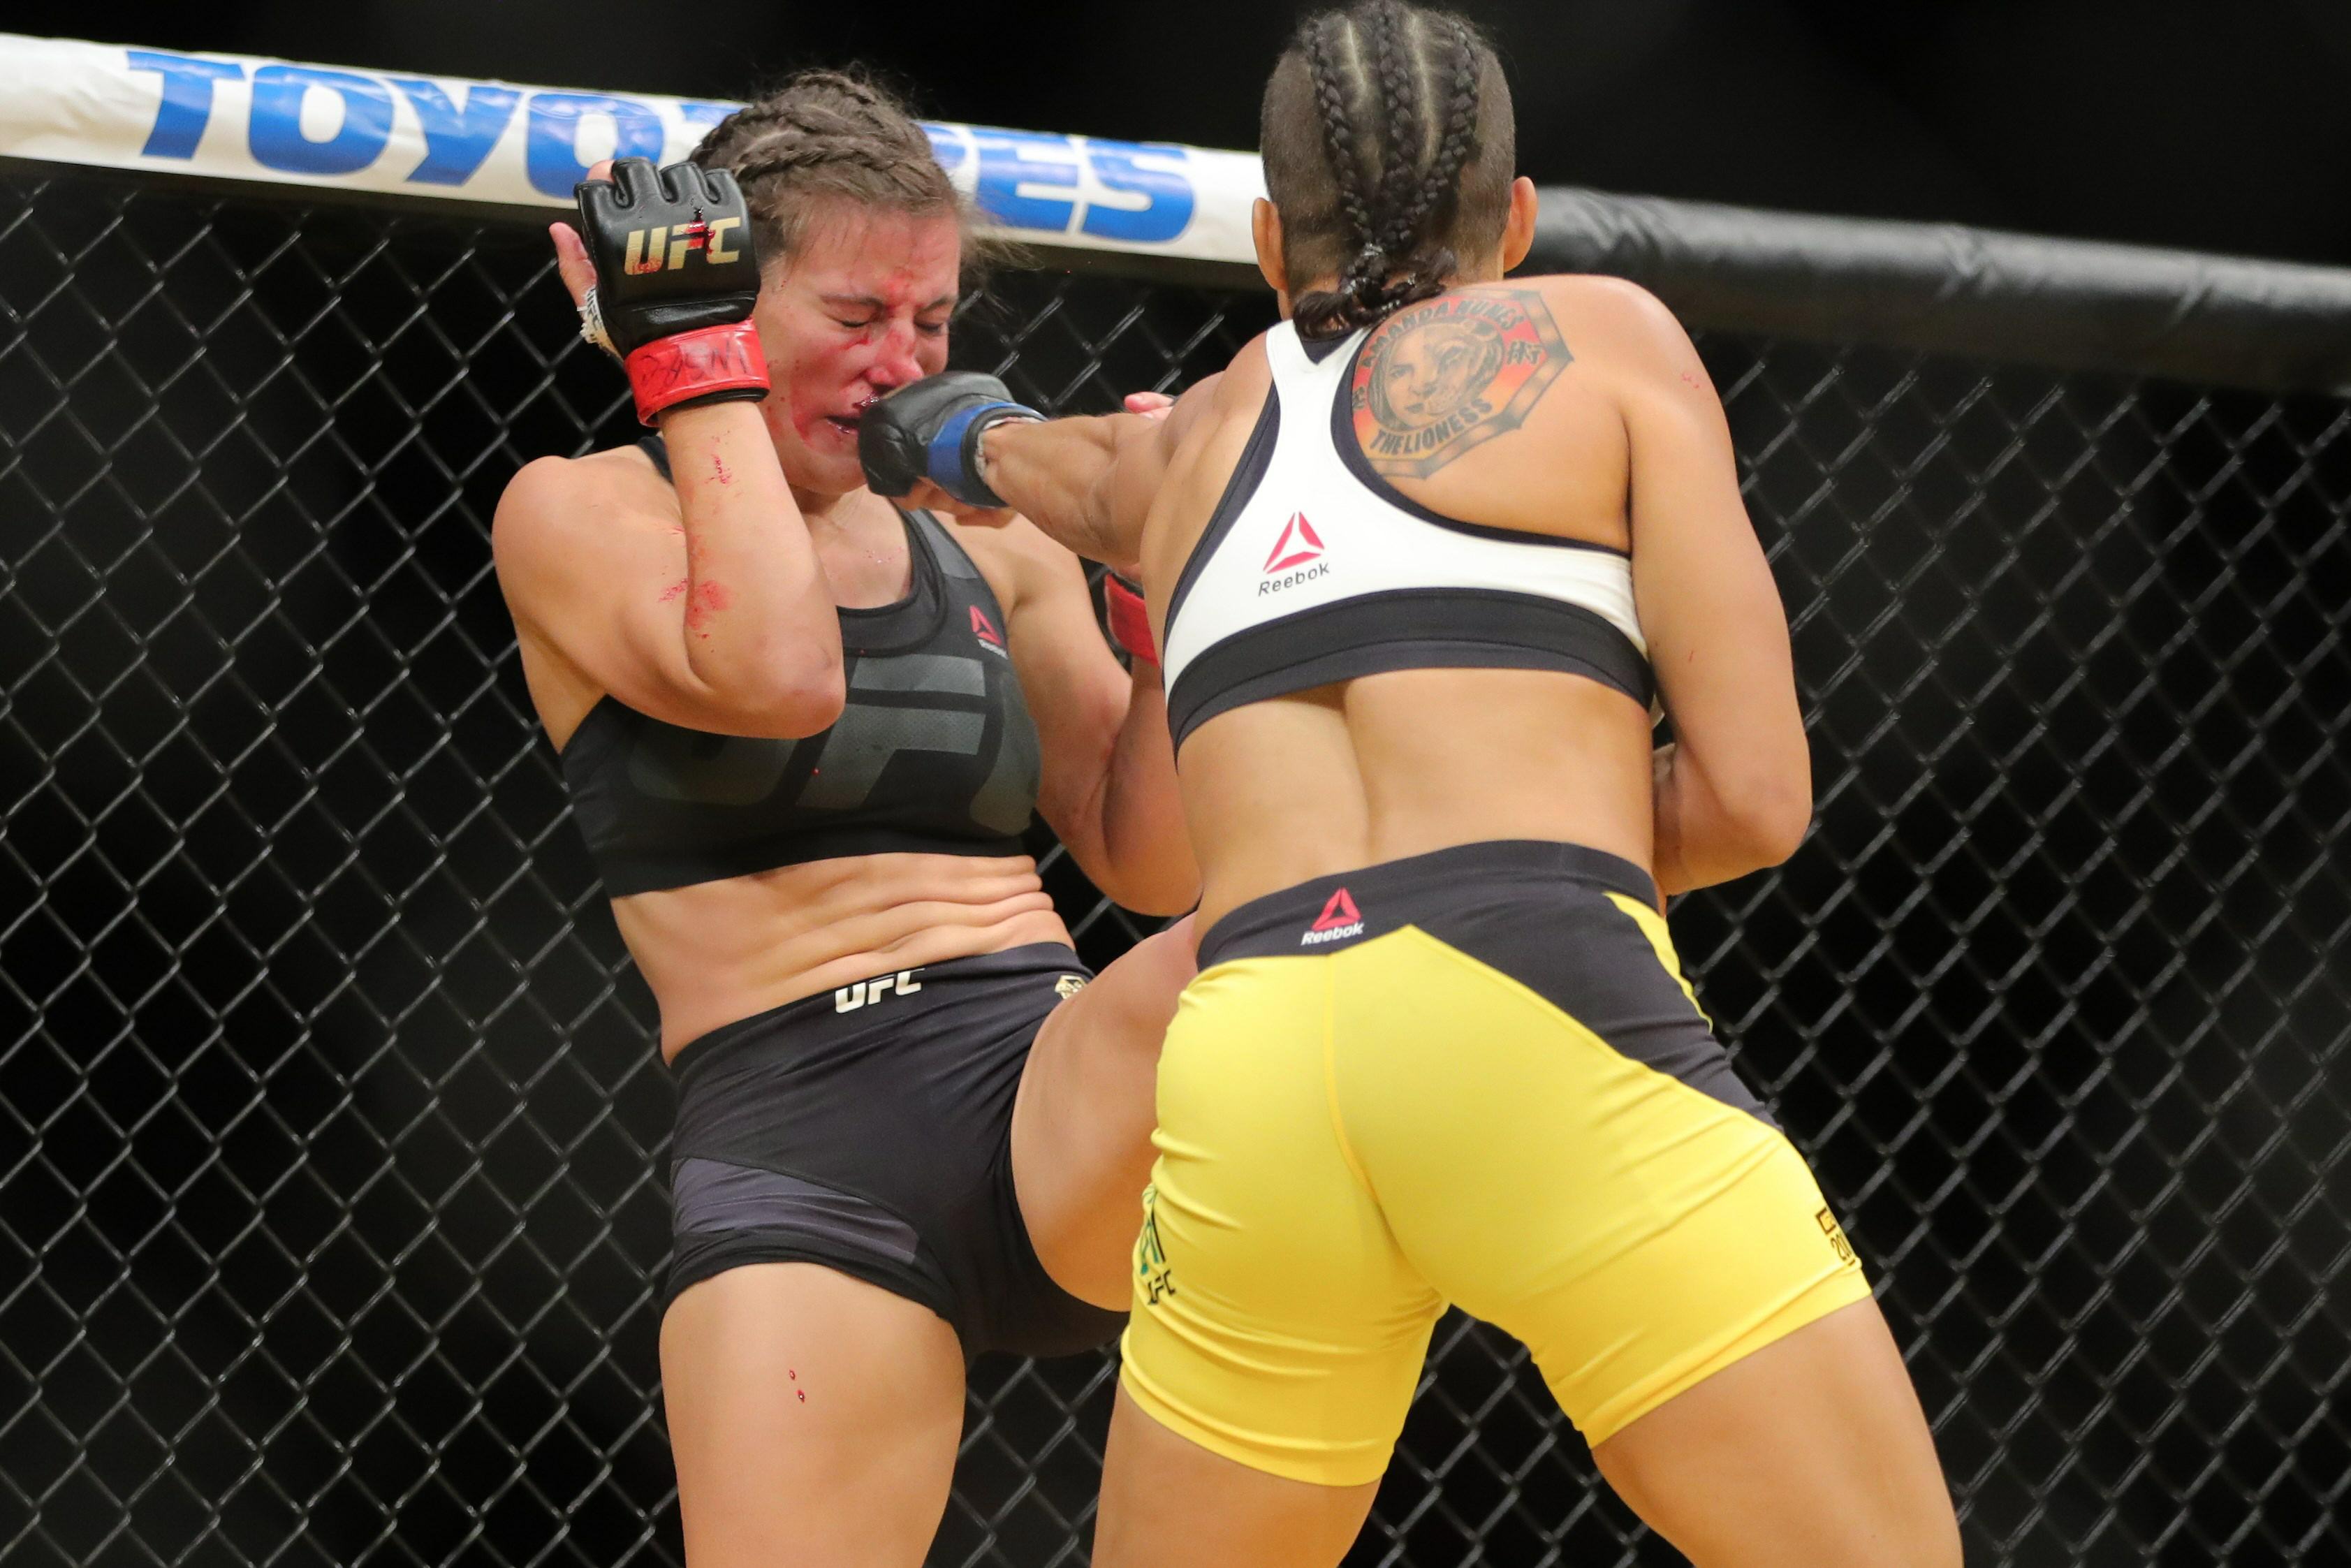 Amanda Nunes punches Miesha Tate (left) during the UFC 200 event at T-Mobil...